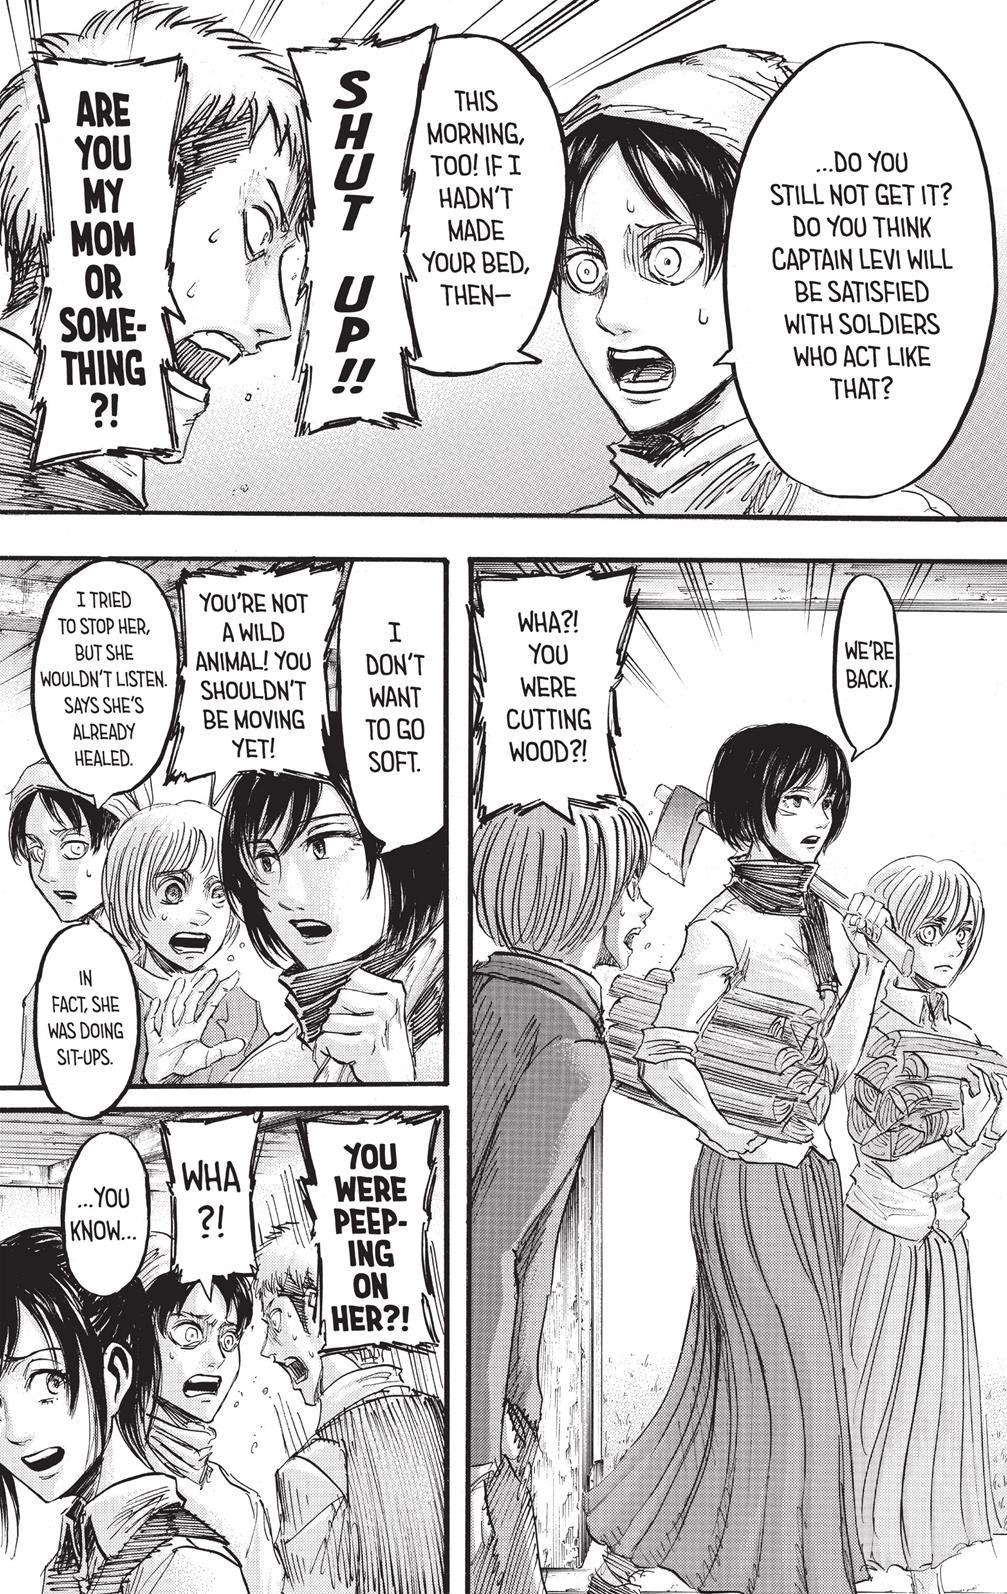 Hey There Attack On Titan Chapter 115 Thoughts